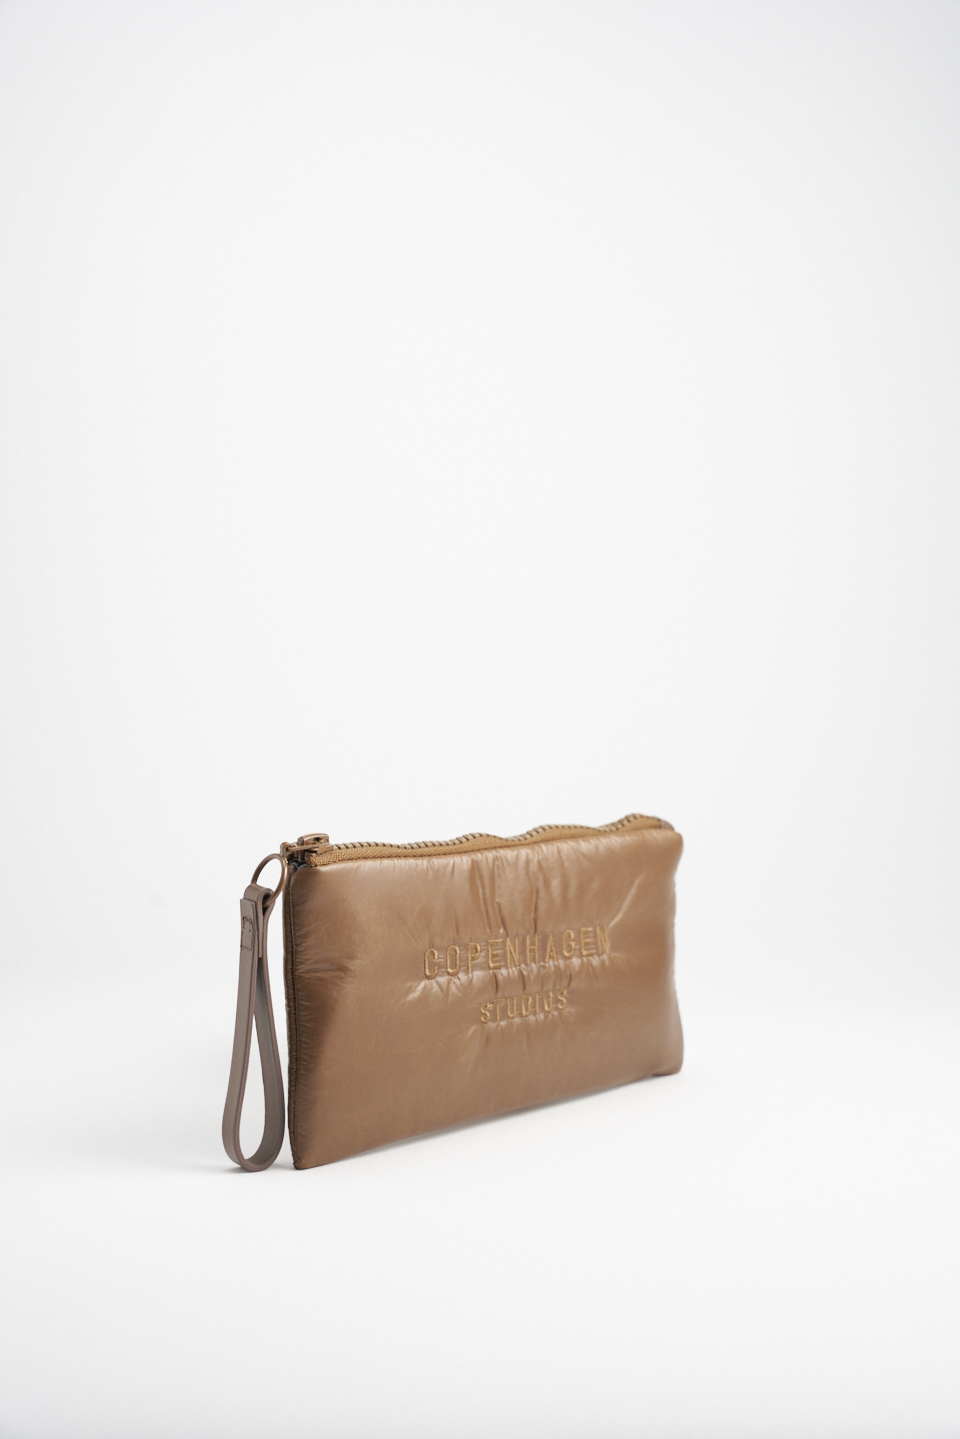 CPH POUCH 2 small recycled nylon nut brown - Alternatieve 1